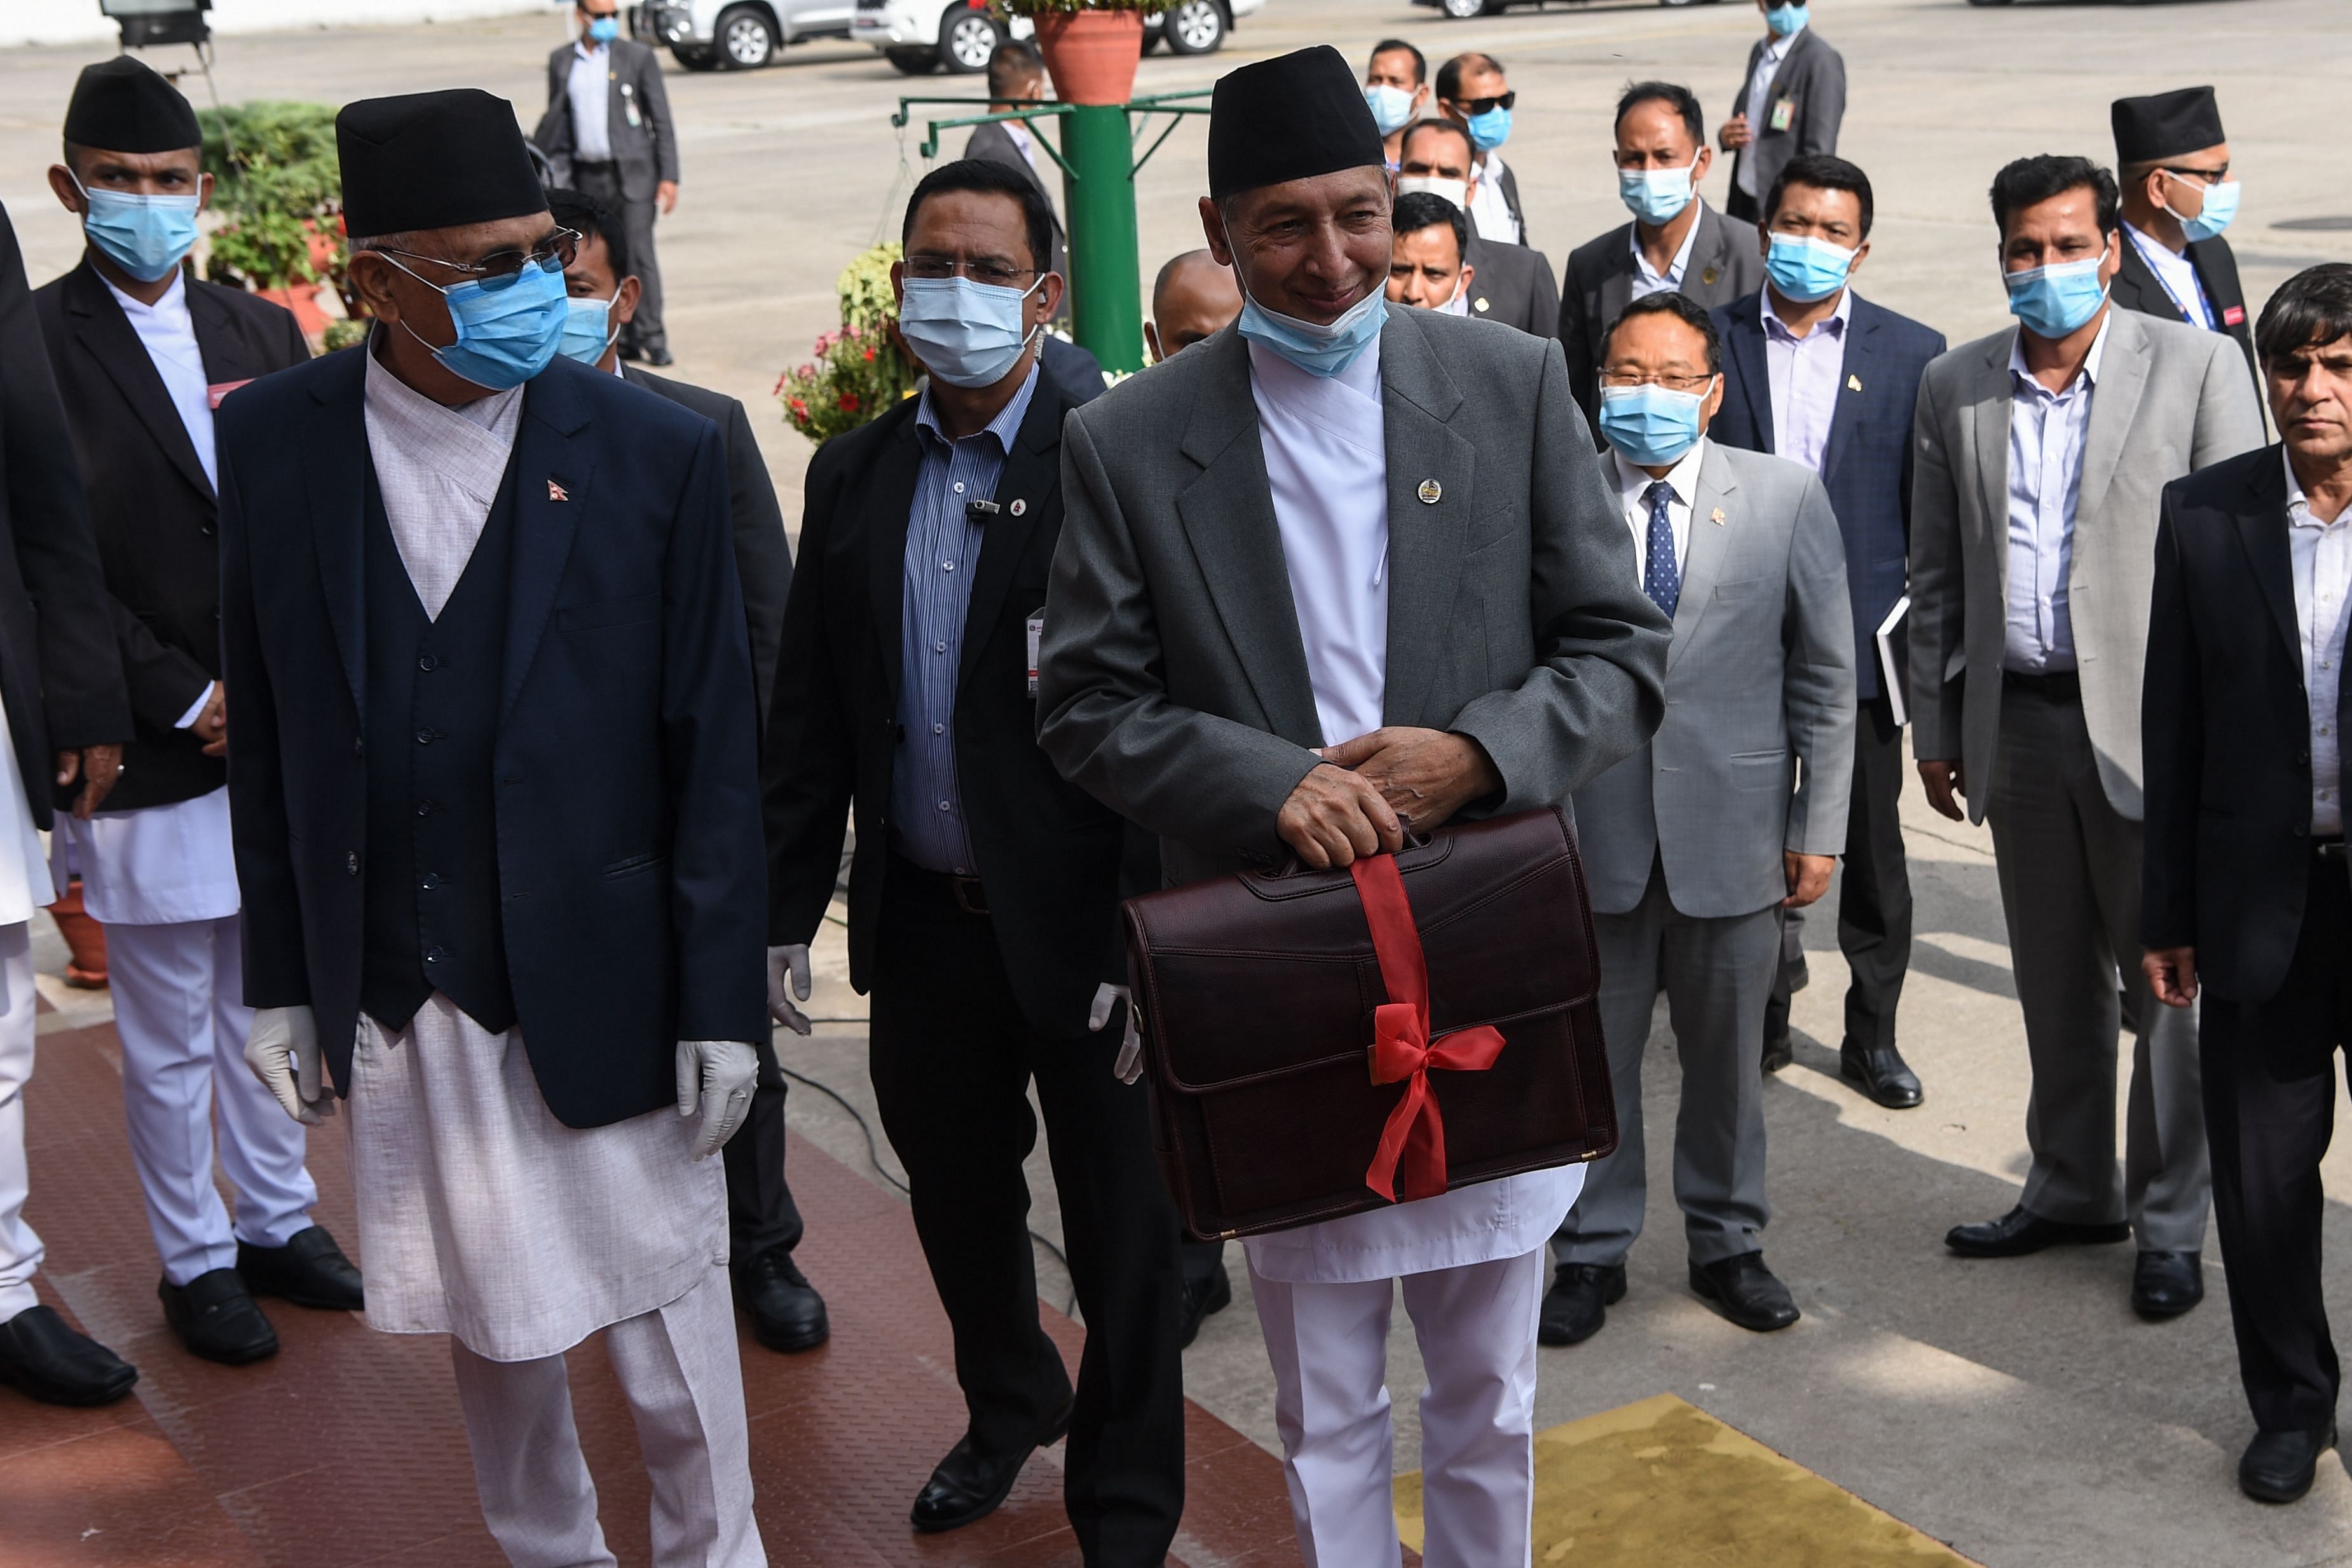 epal's Finance Minister Yubaraj Khatiwada (center R) and Prime minster KP Sharama Oli (L) arrive at the parliament to announce the government's budget for the 2020/2021 fiscal year, in Kathmandu. (AFP Photo)